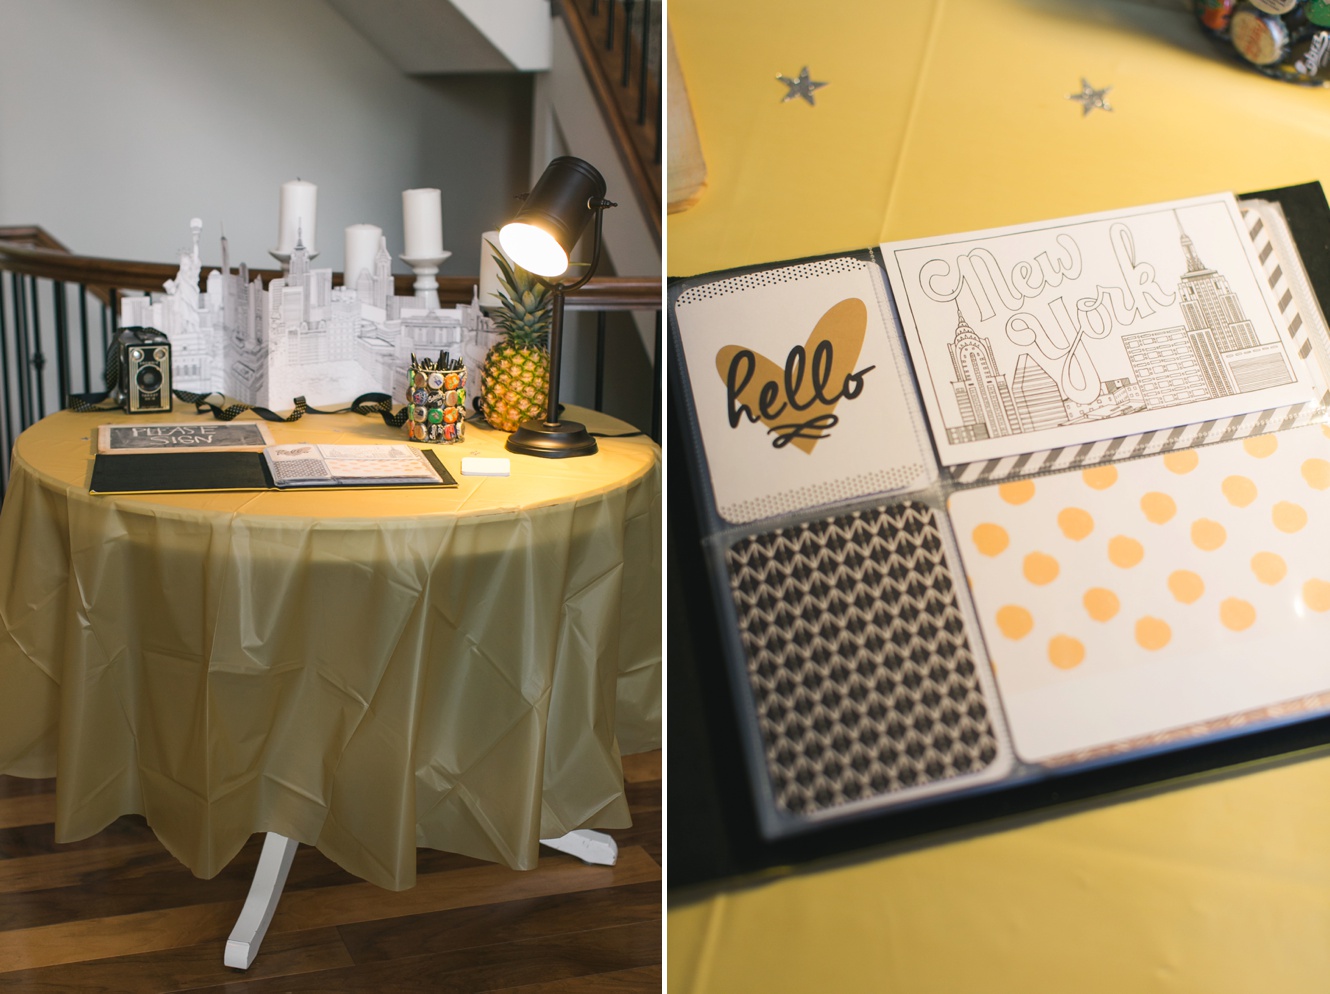 Gold and black striped party theme photo